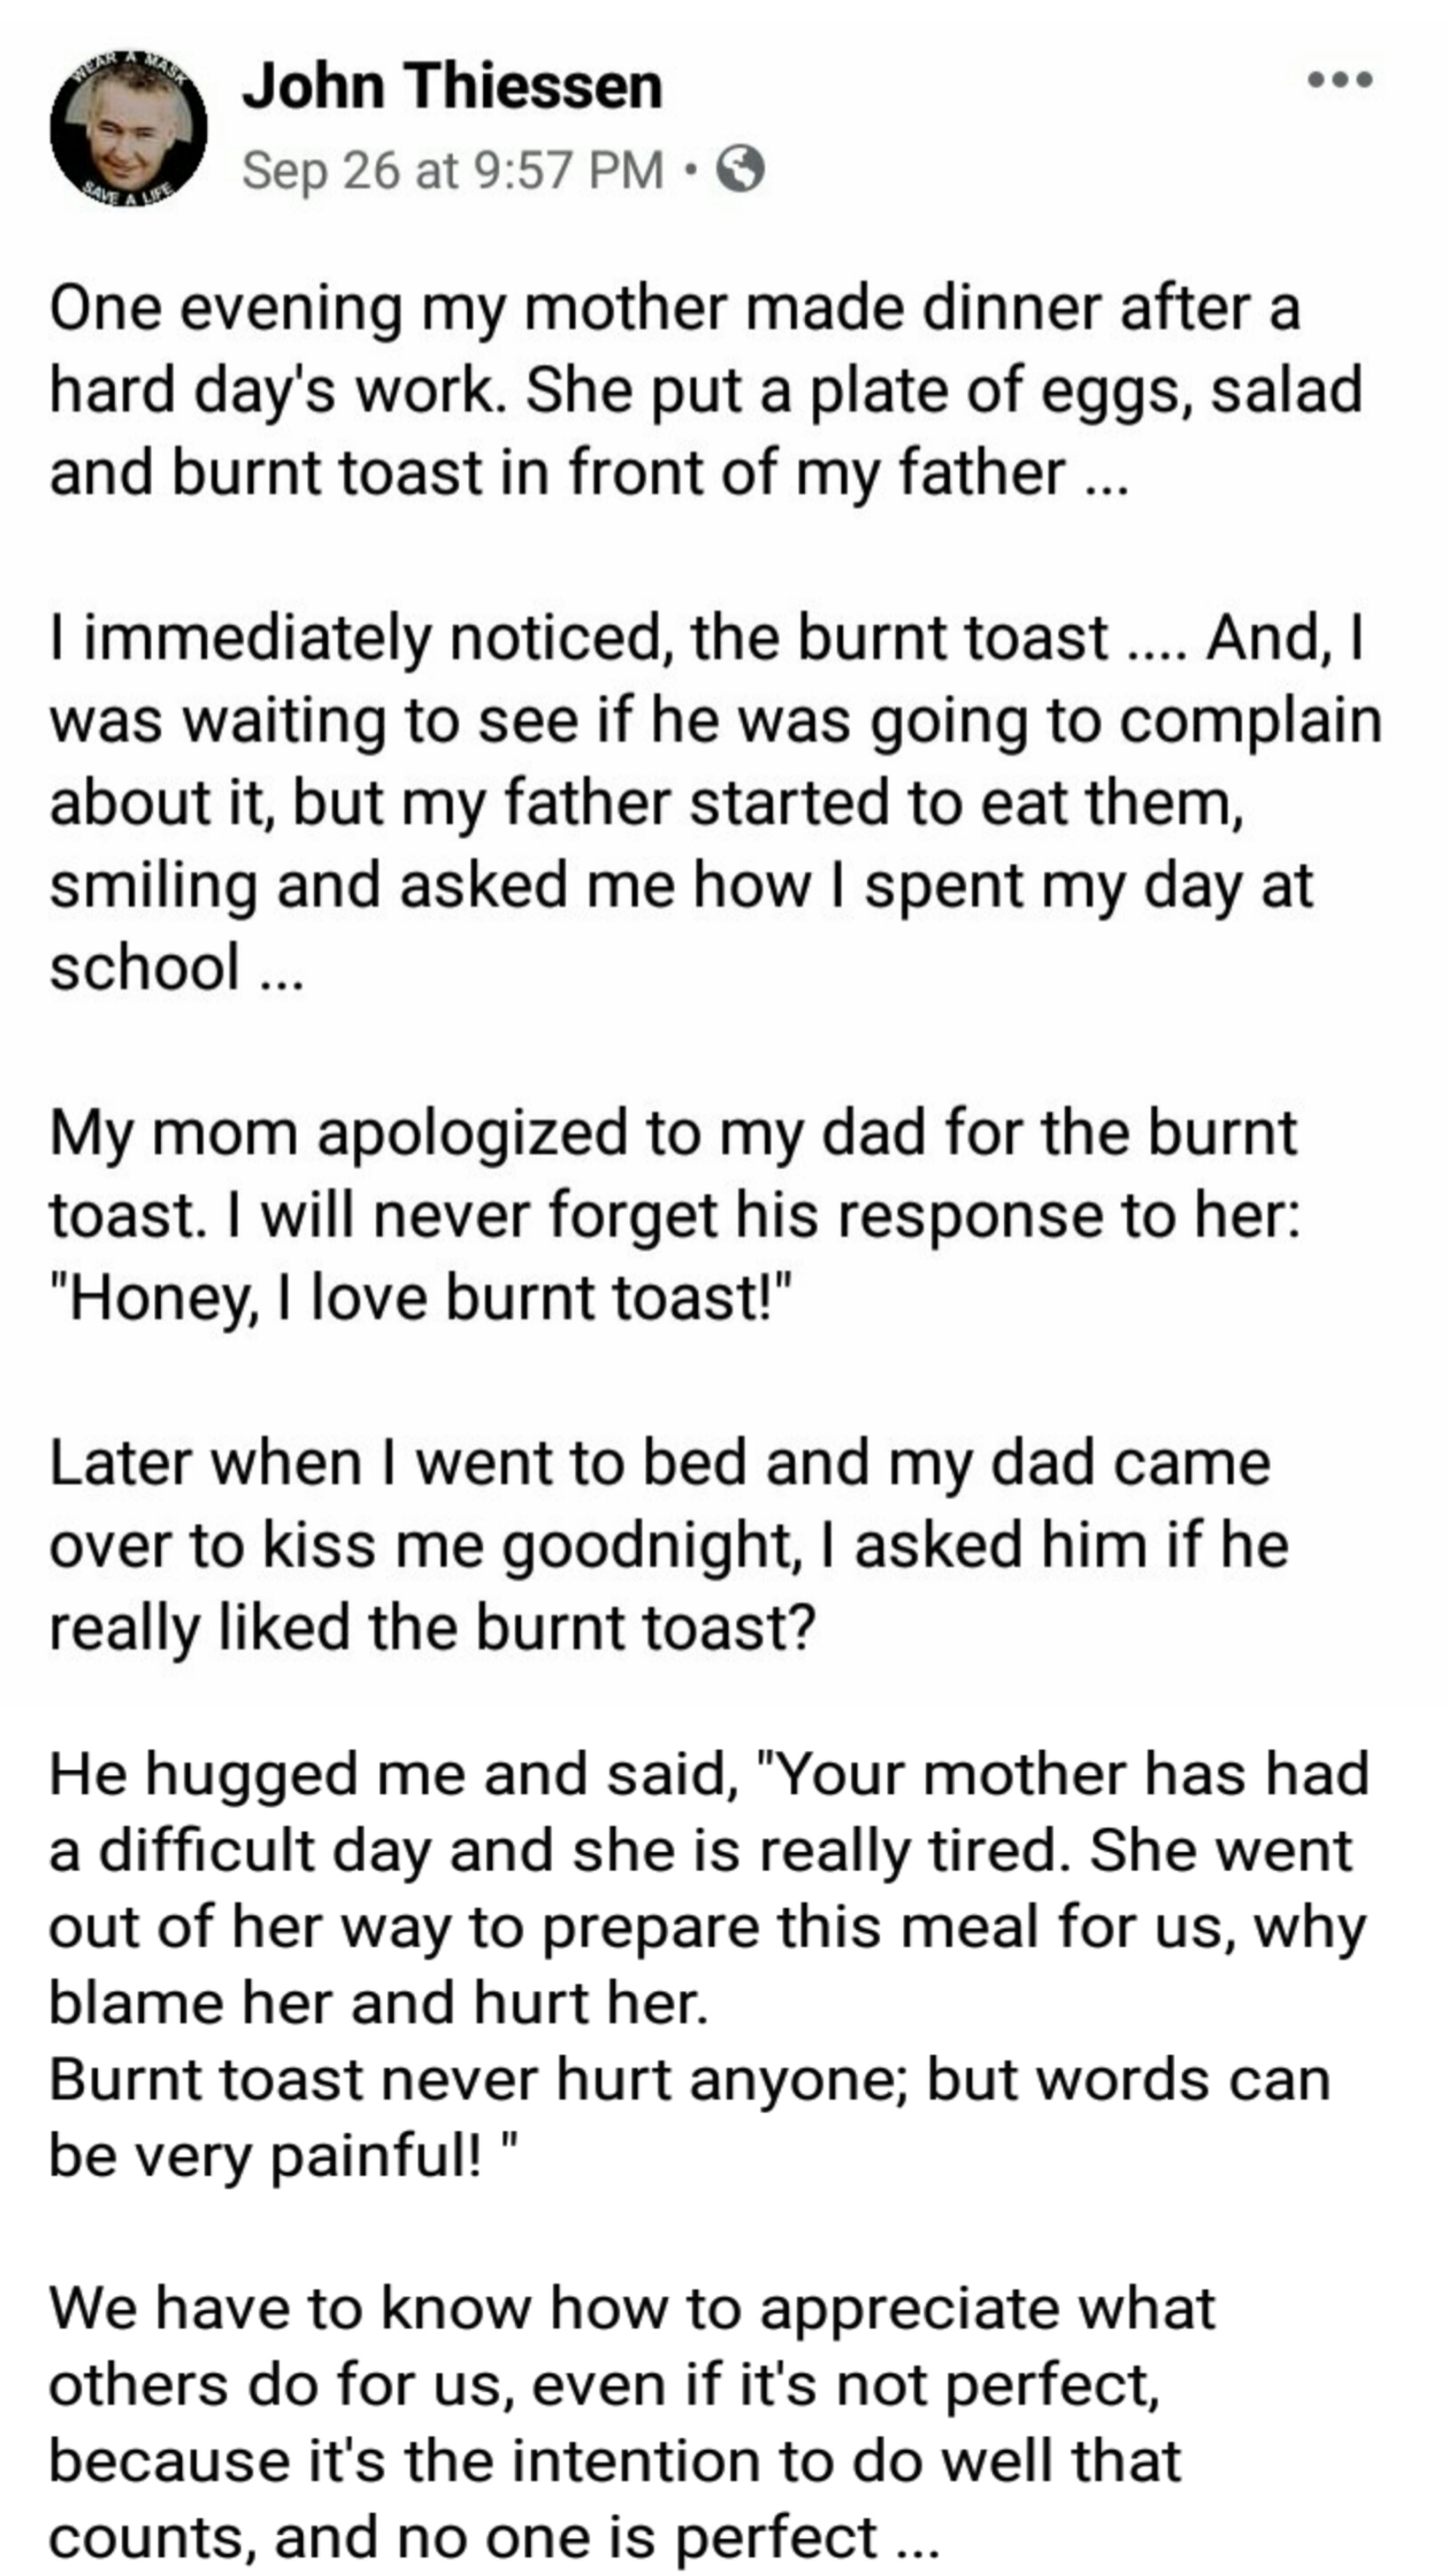 The toast is a lie.